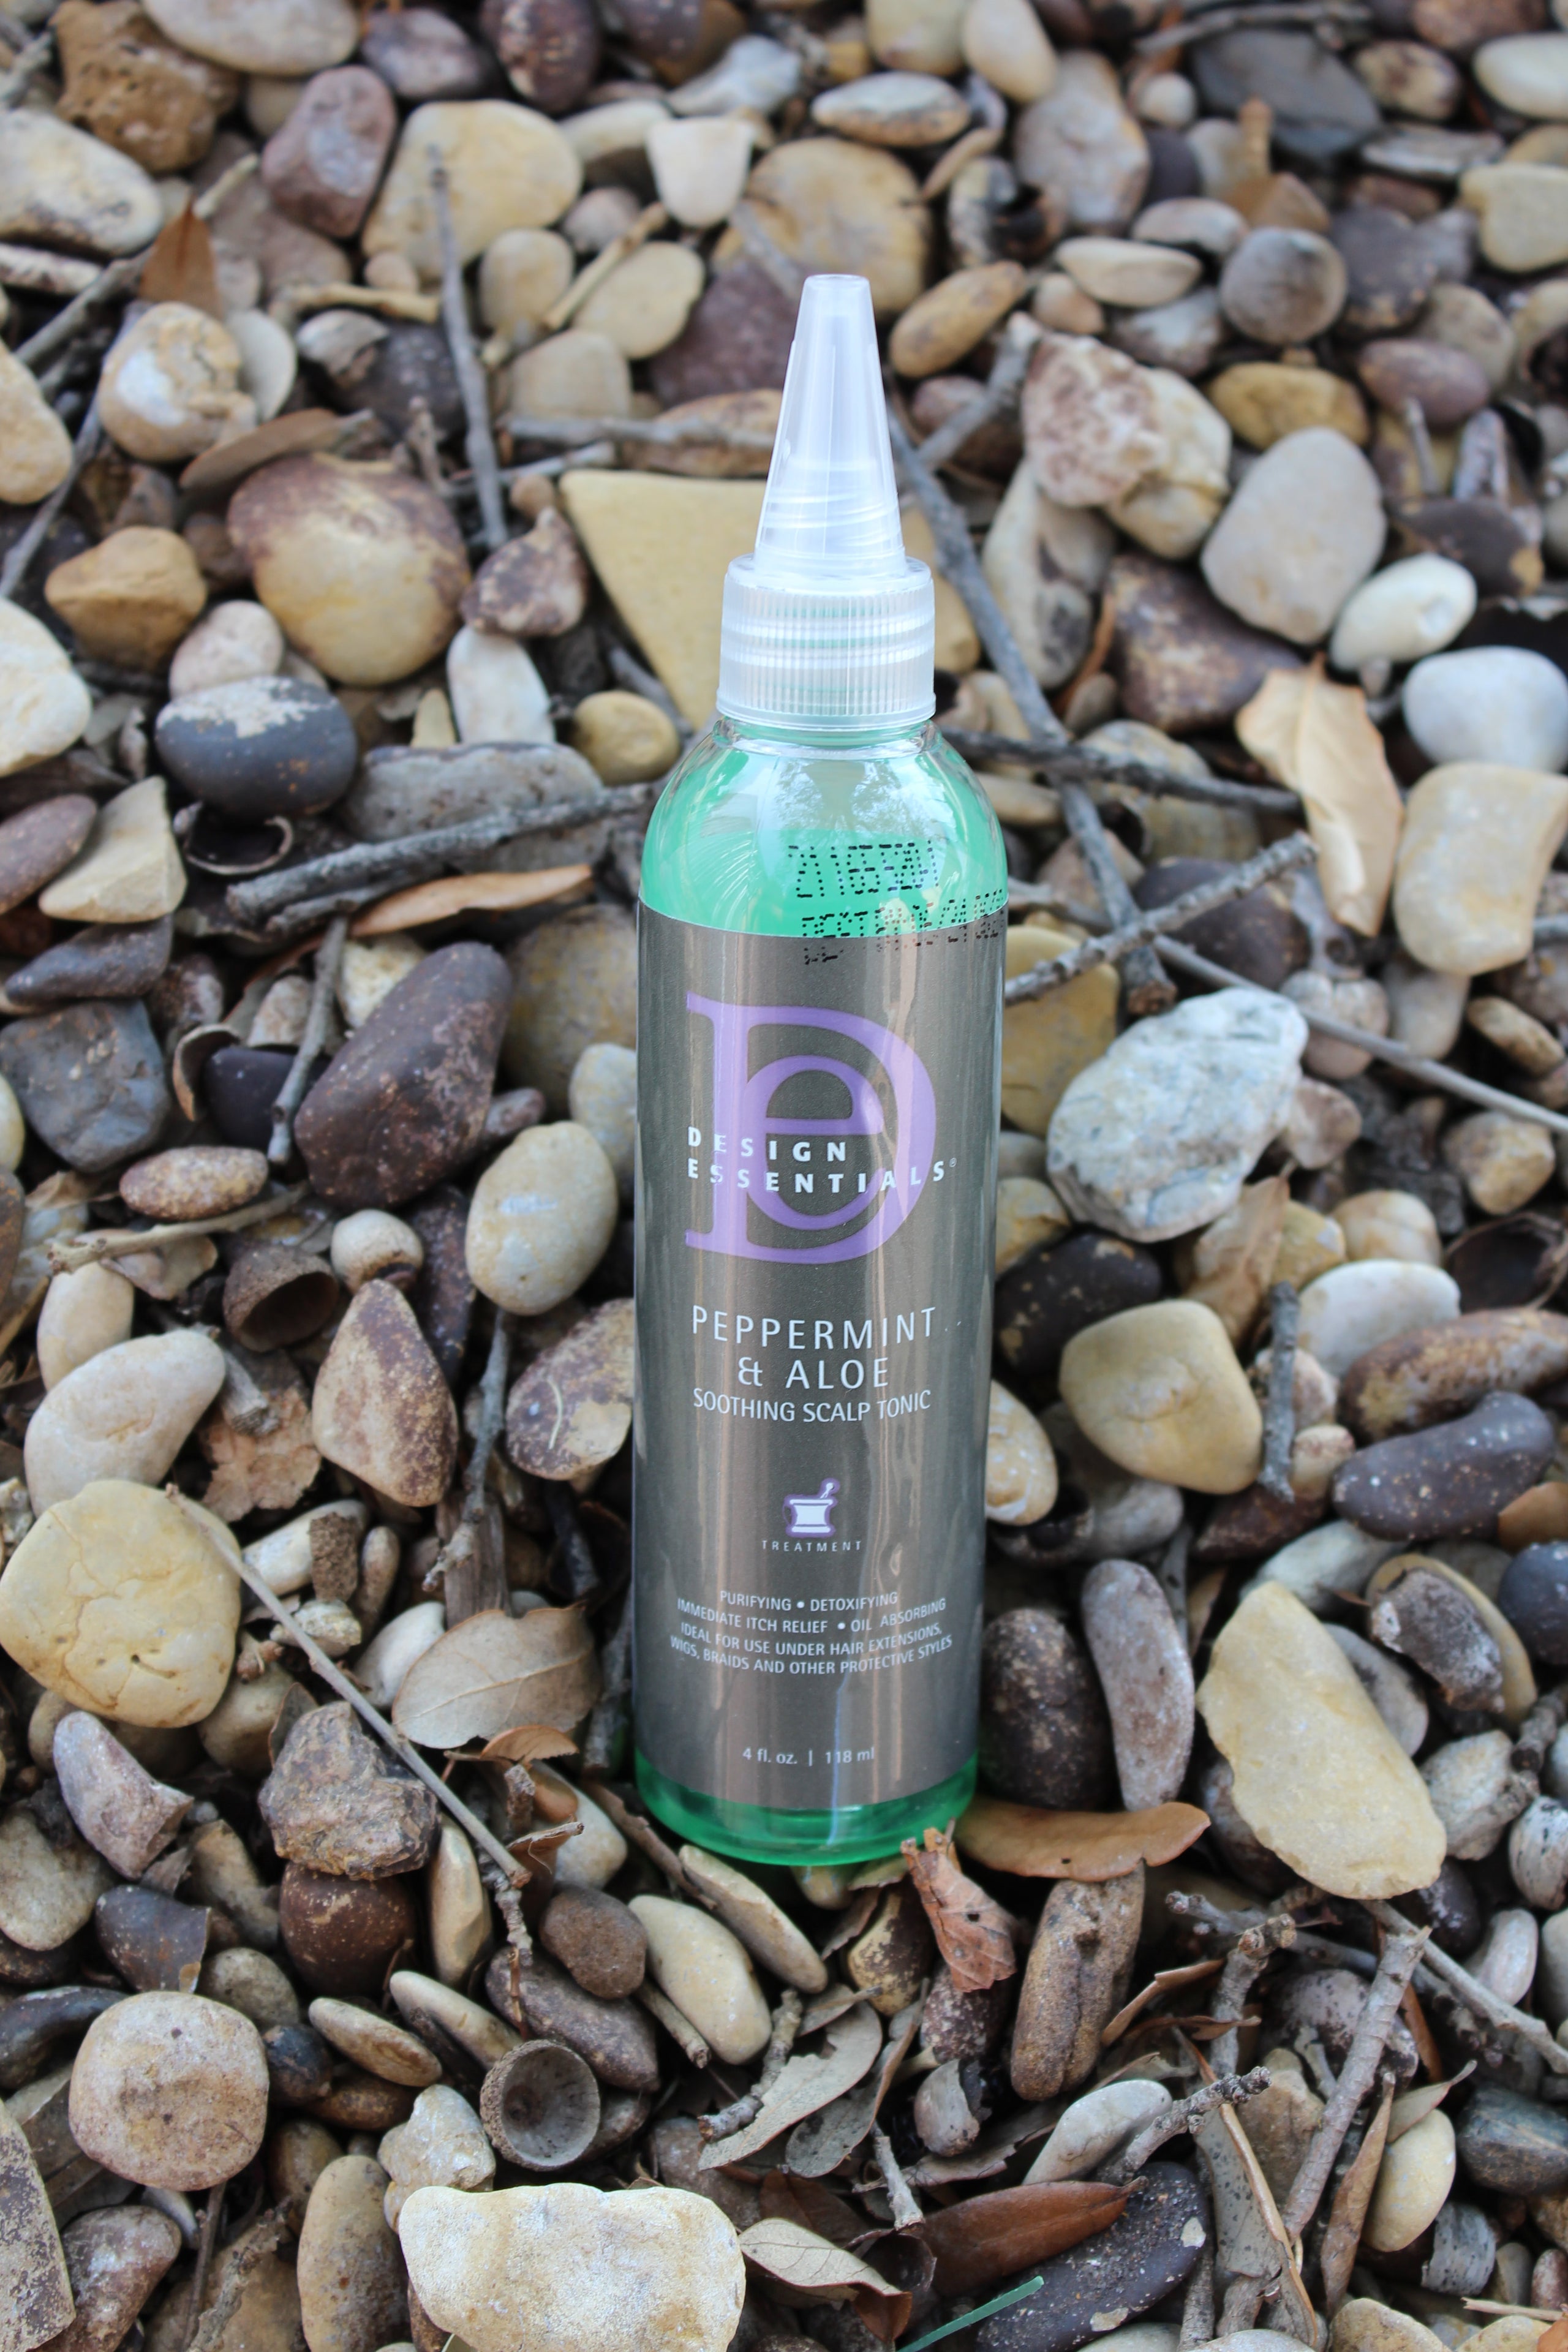 Peppermint & Aloe Soothing Scalp Tonic